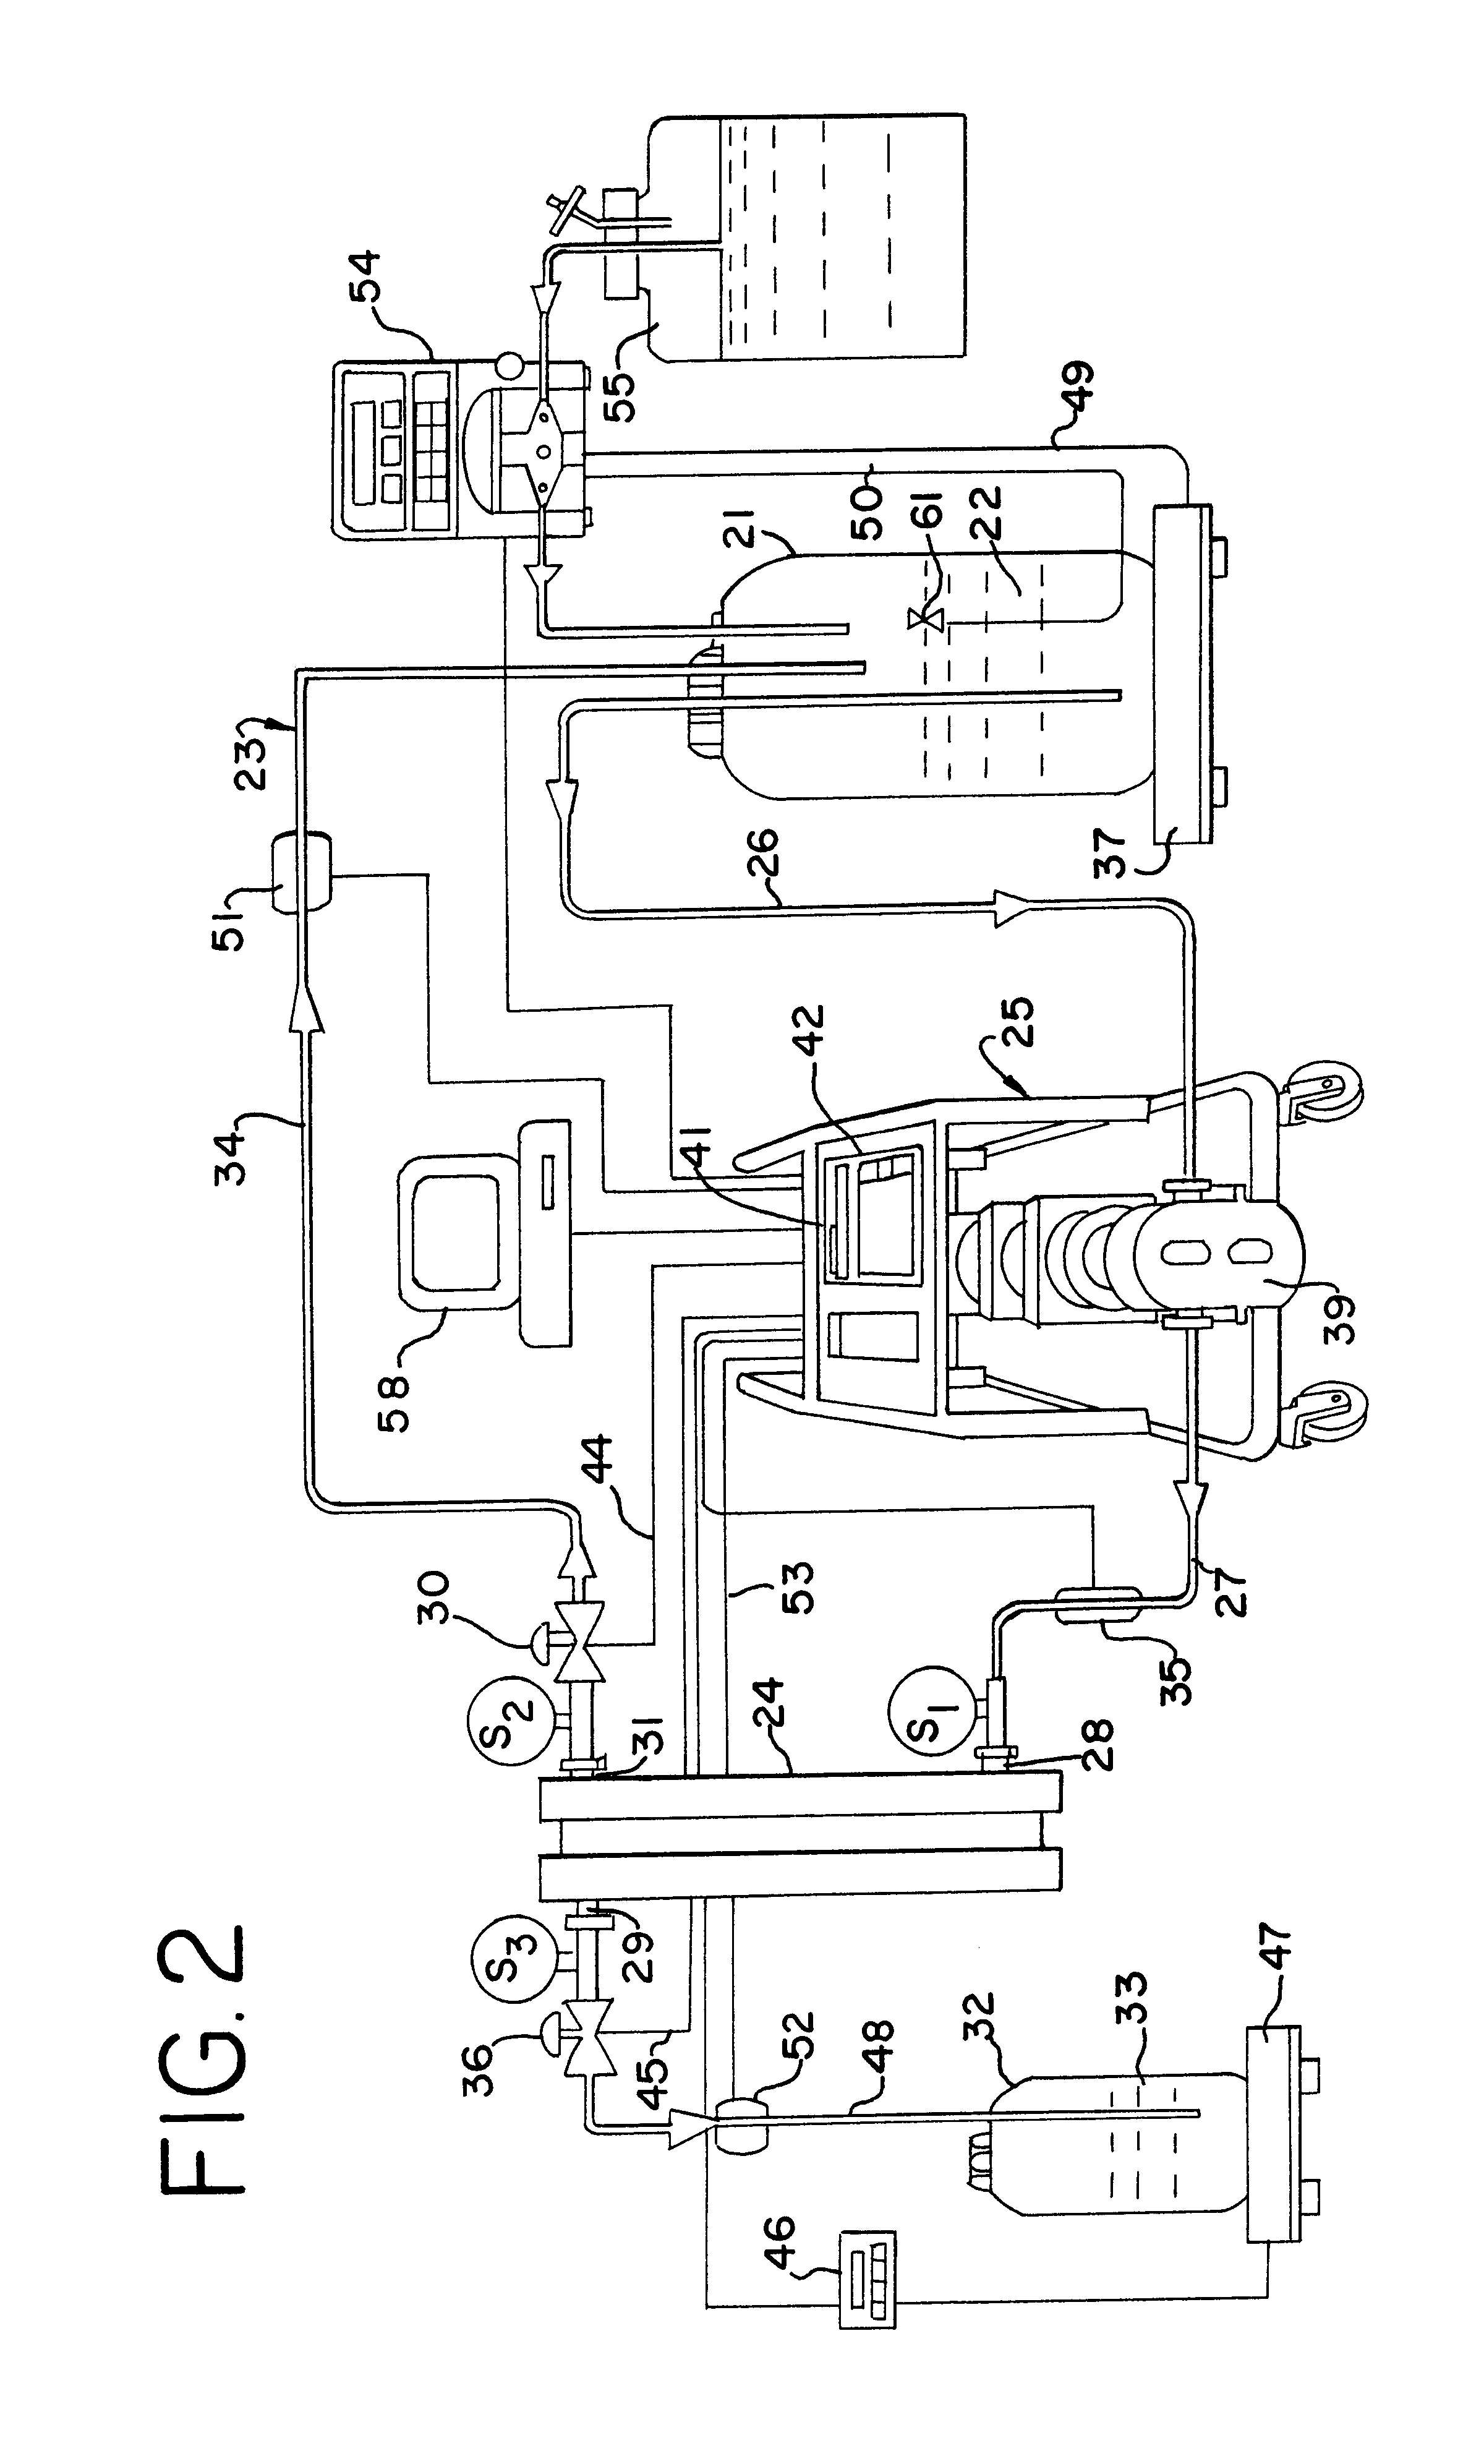 Method and apparatus for enhancing filtration yields in tangential flow filtration